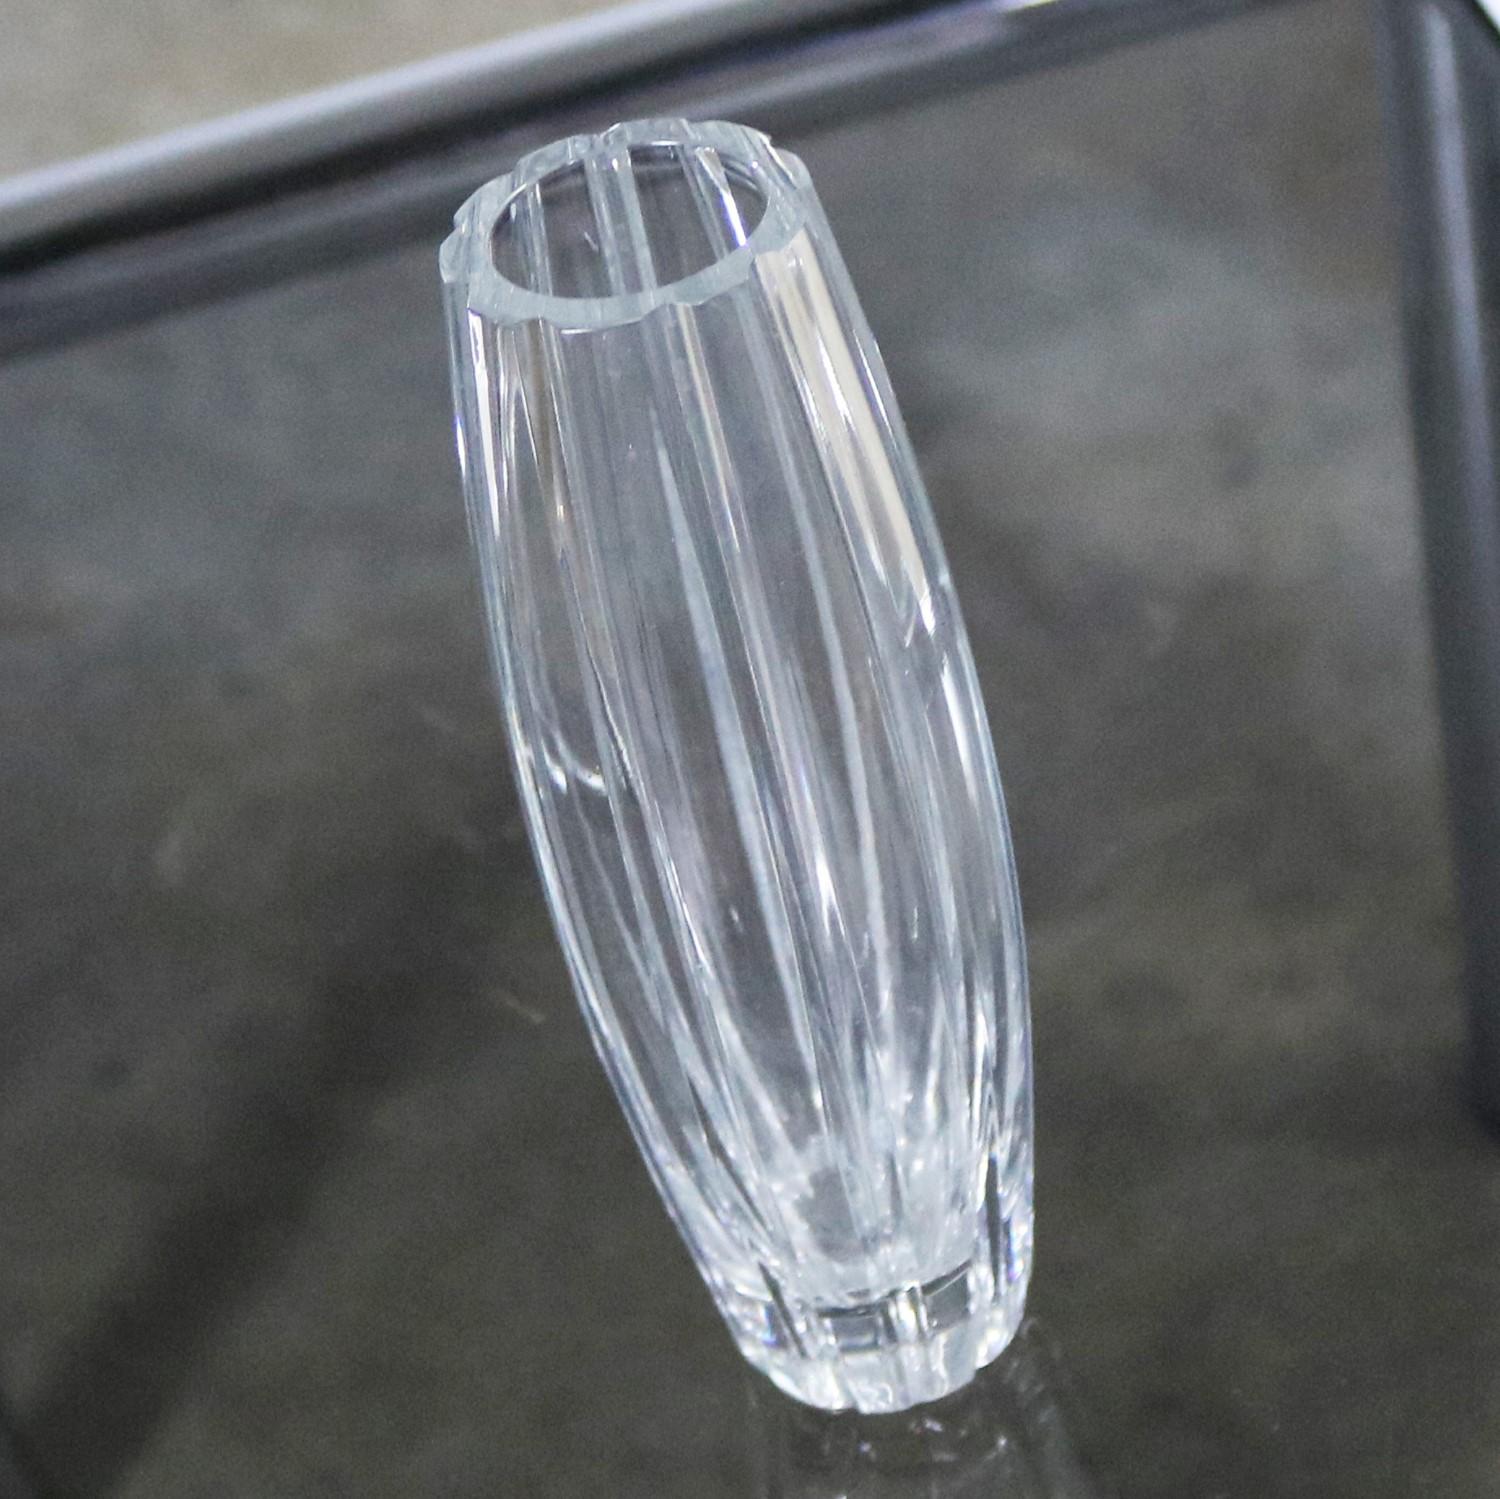 Handsome small marquis by Waterford bud base from their Palladia Collection. It is in excellent condition with no chips, cracks, or chiggers, circa 1993-2003.

Small but mighty. Perfect description for this lovely little vase from Waterford’s